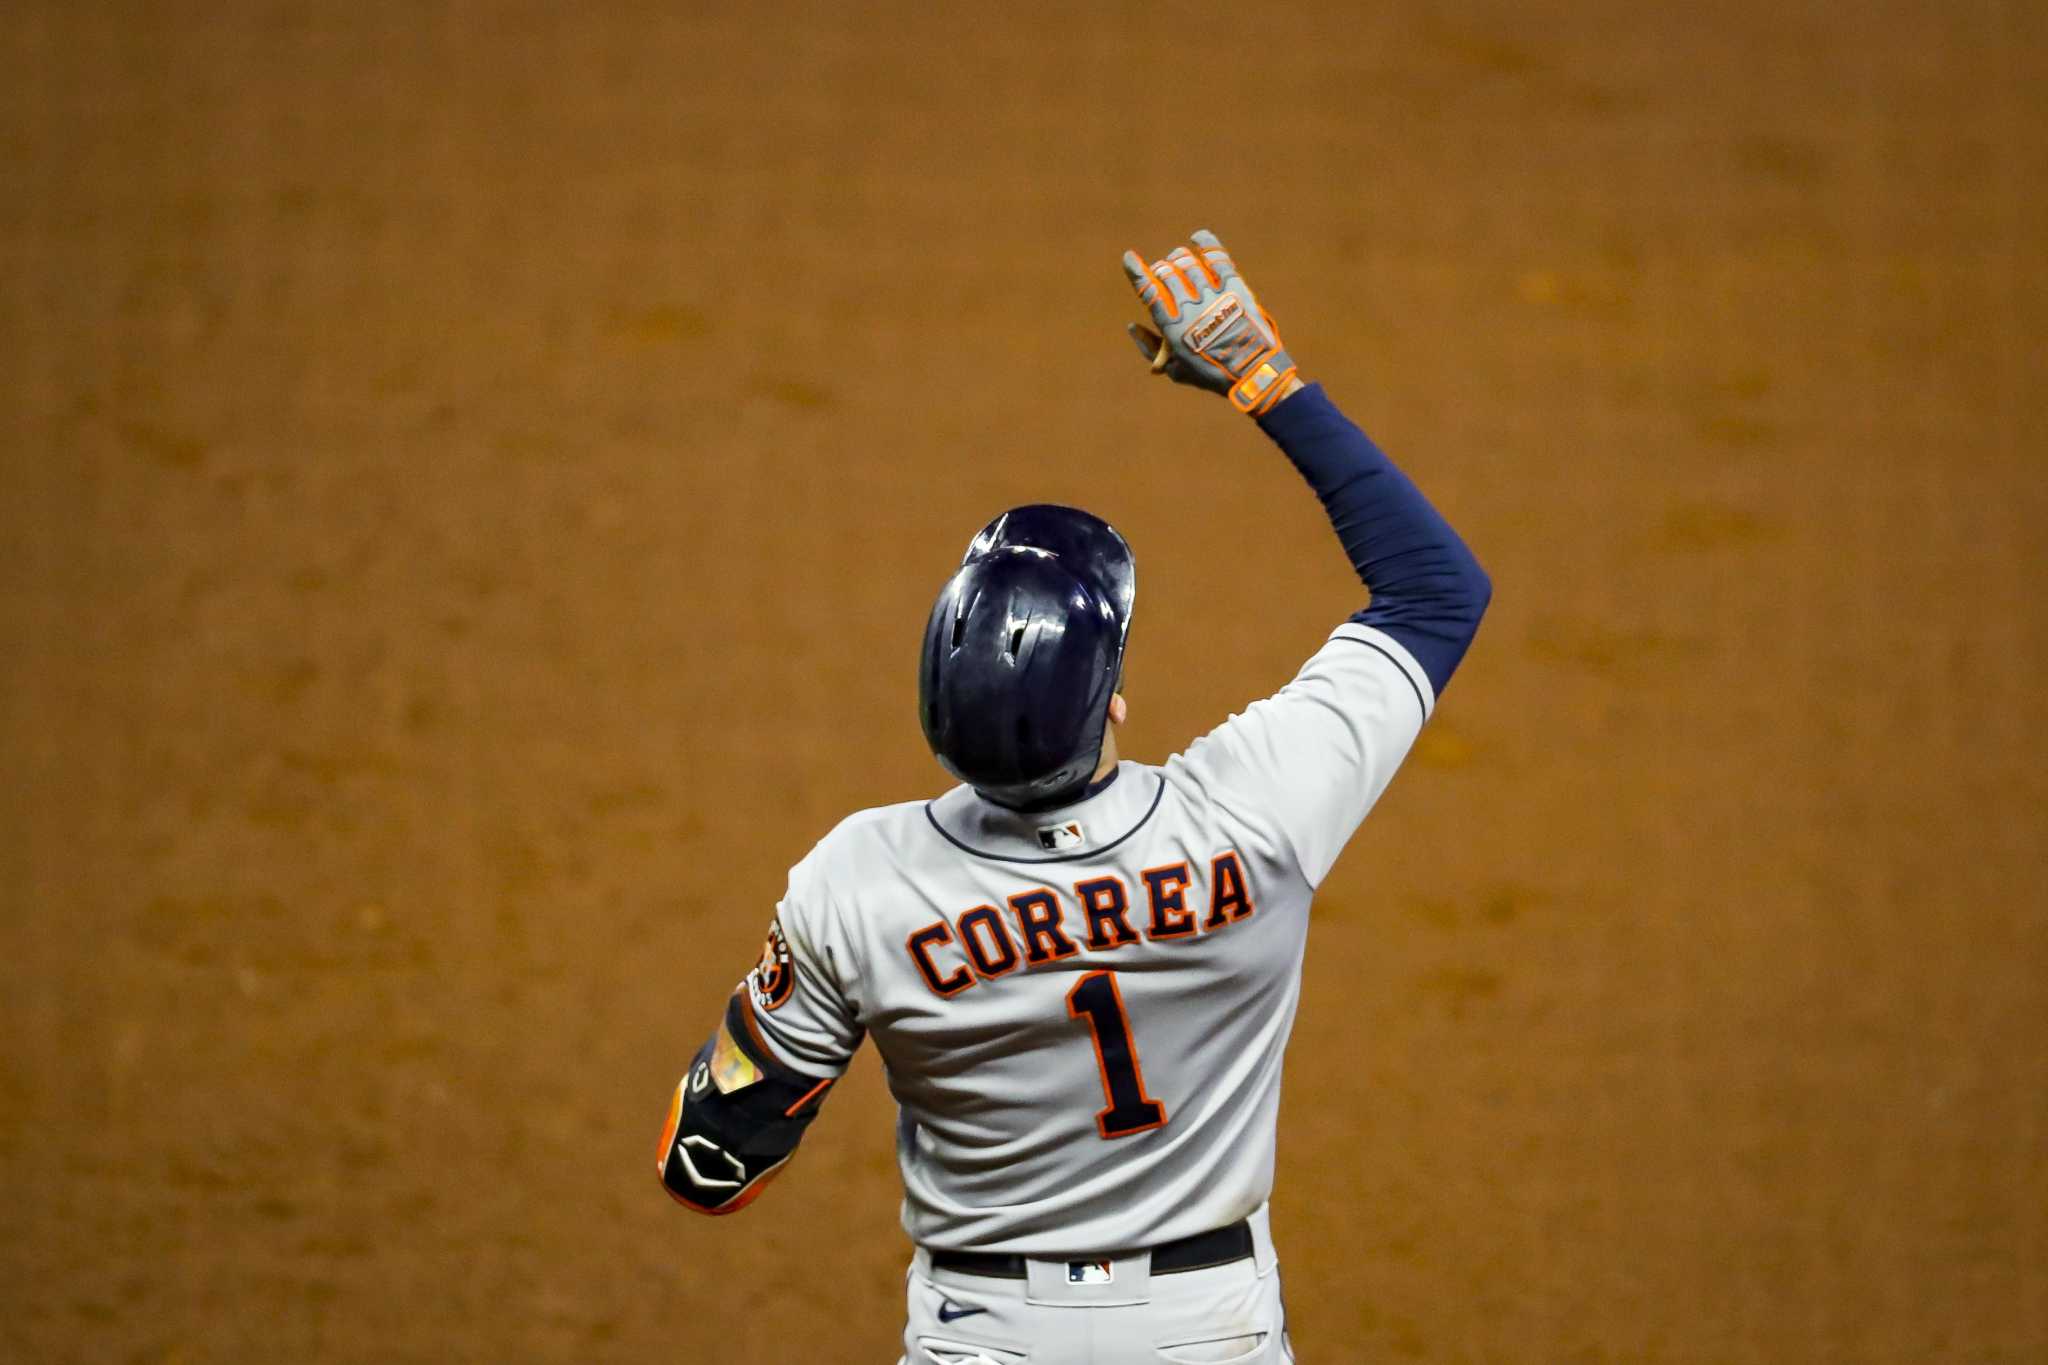 Smith: It's time for Carlos Correa to move on with his future